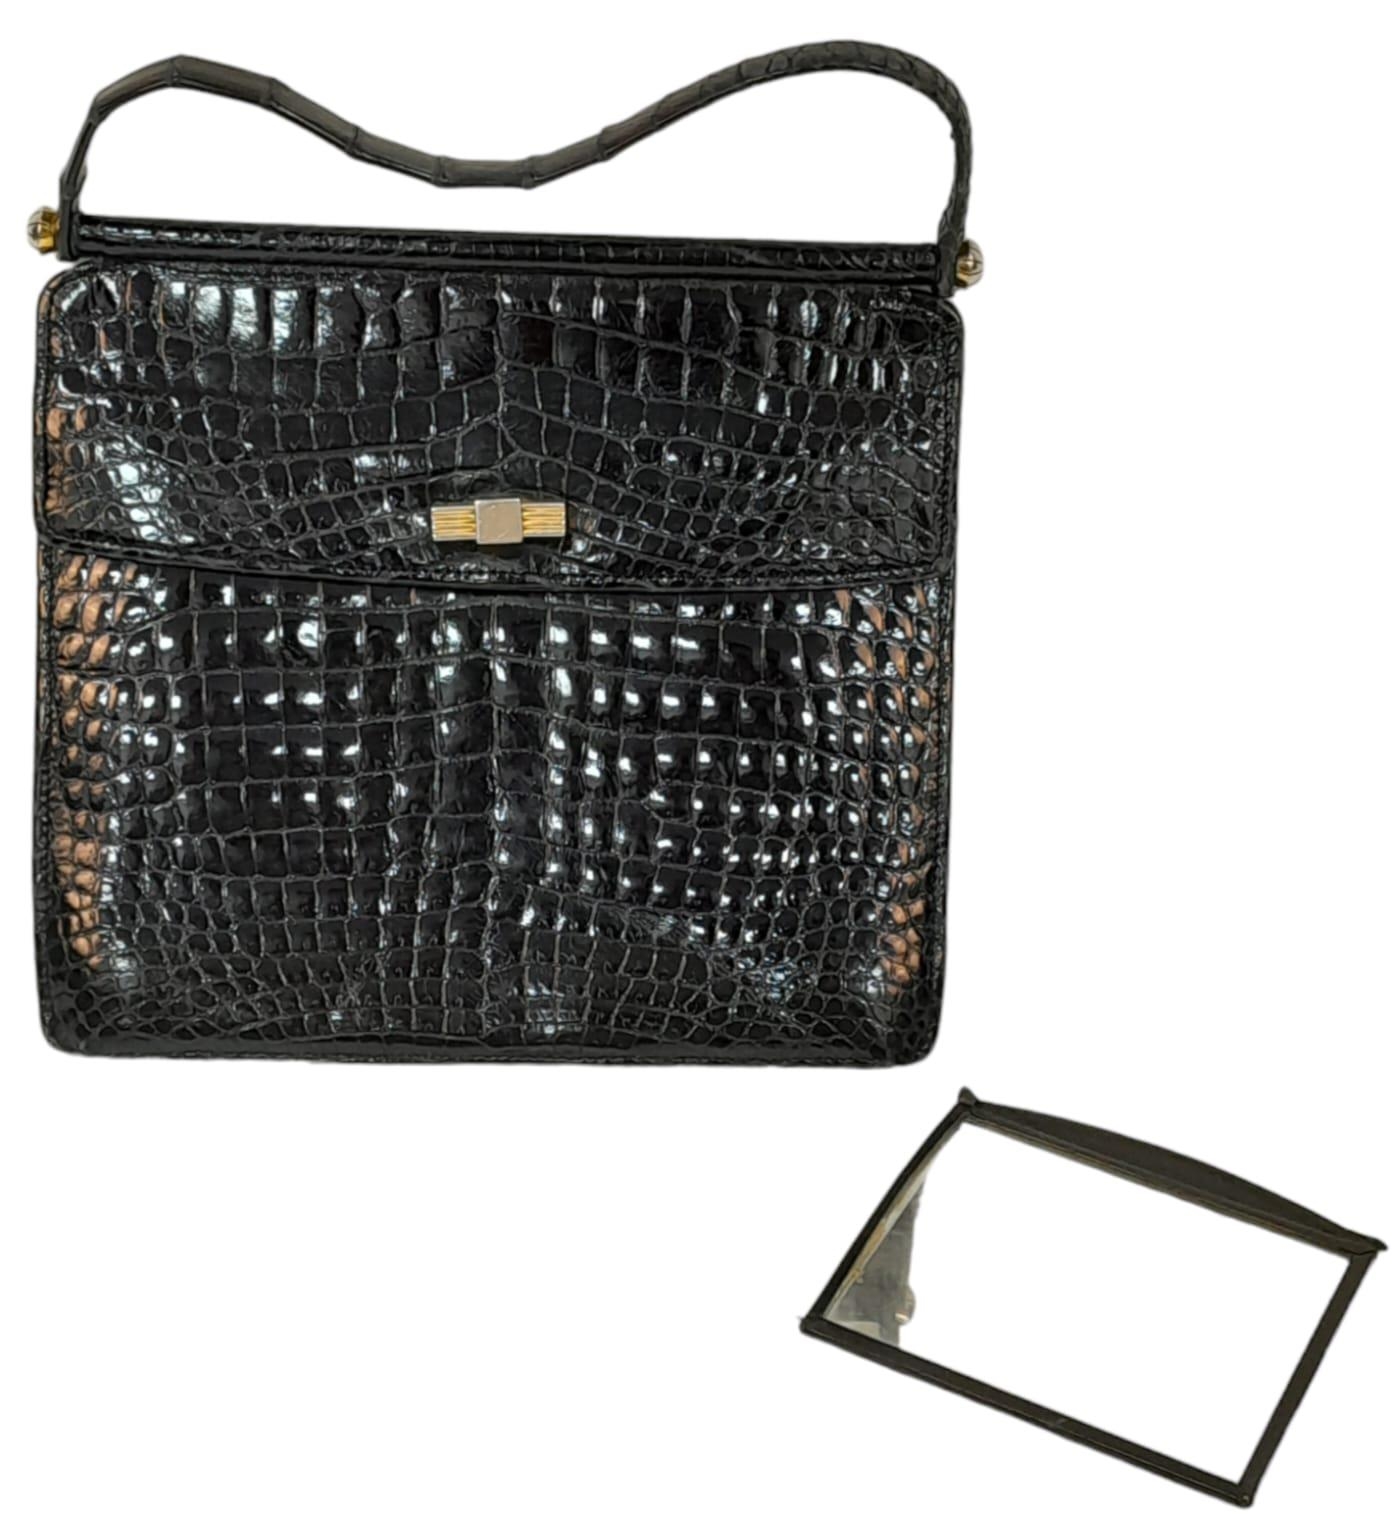 Two Crocodile Leather Hand Bags. Black crocodile bag has gold-toned hardware, a single strap and - Image 4 of 6